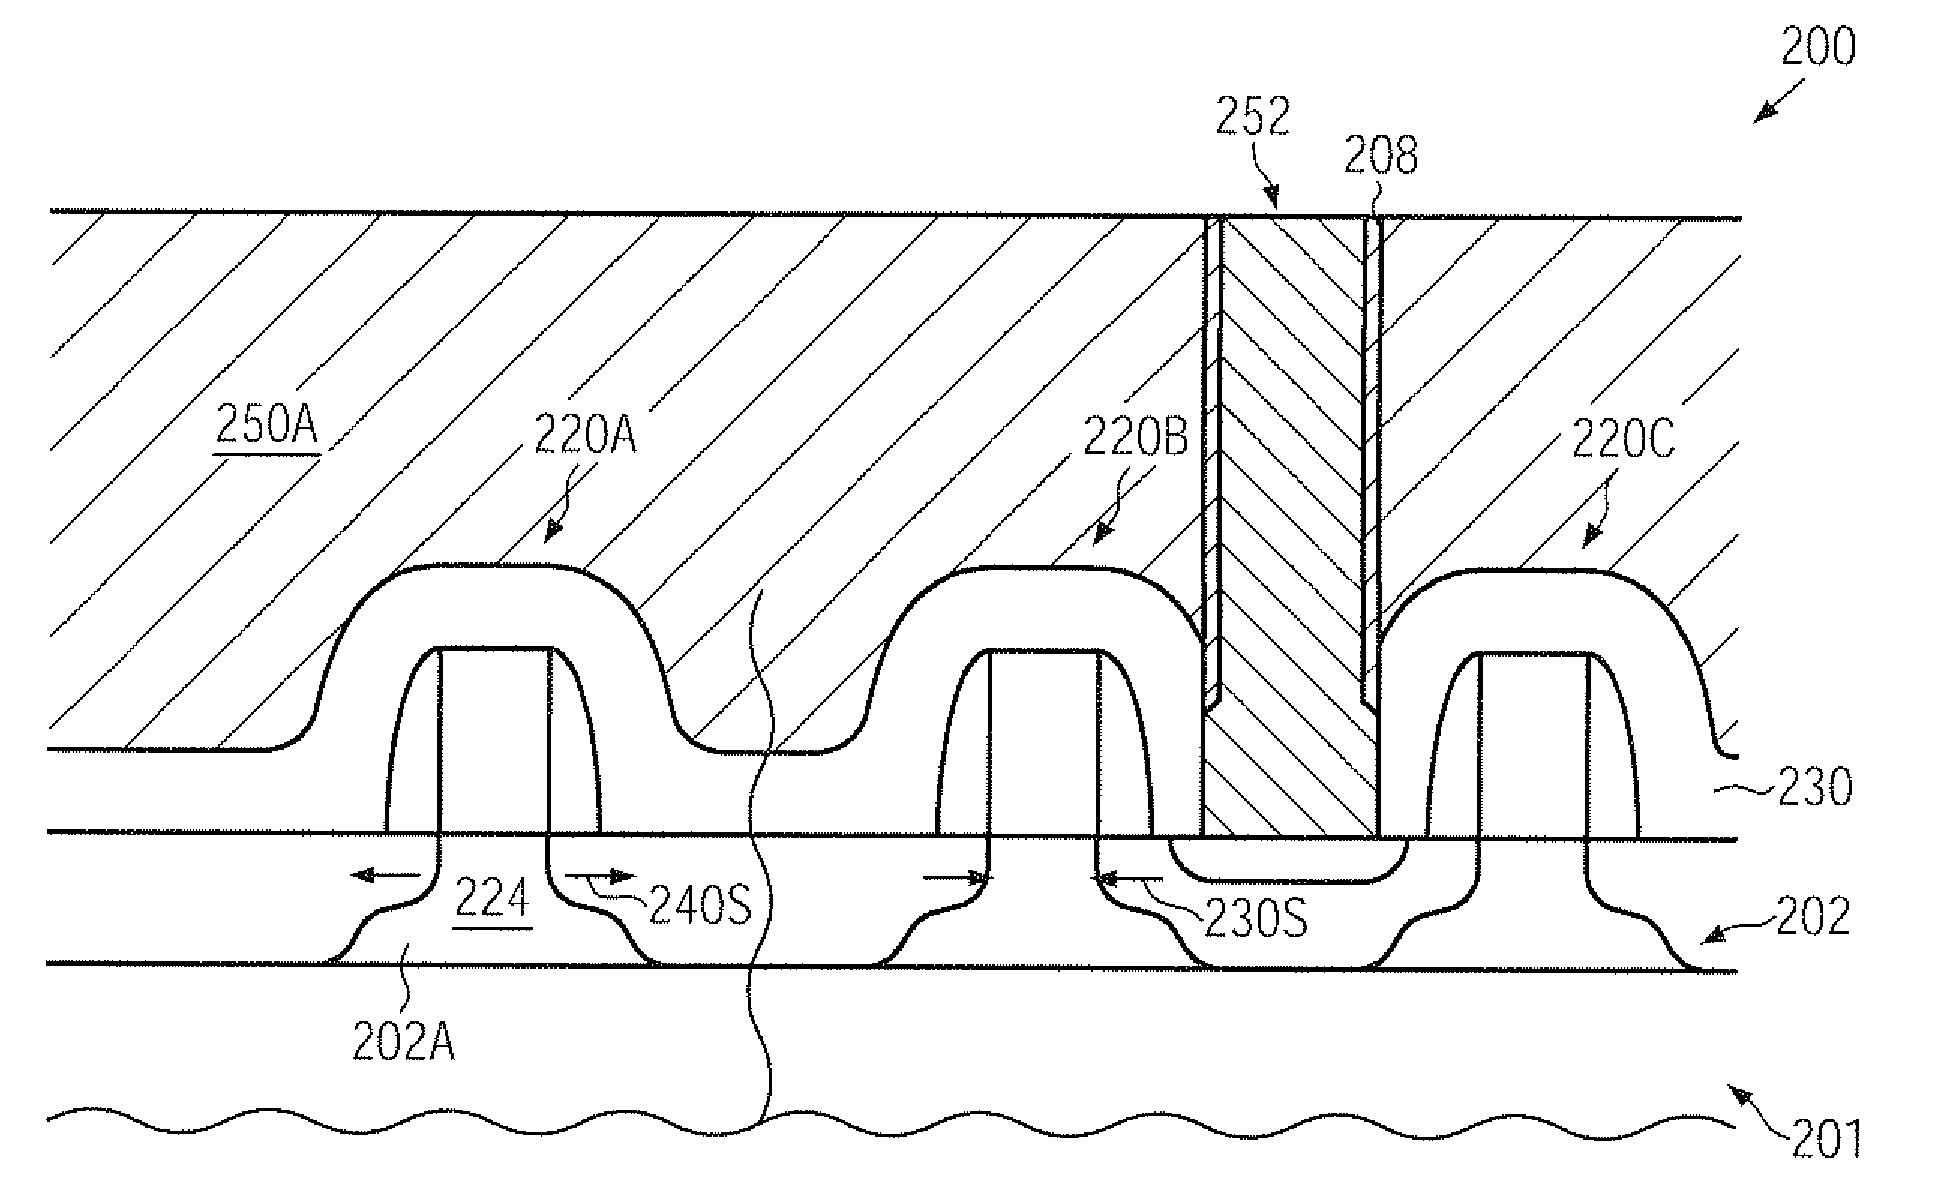 Void sealing in a dielectric material of a contact level of a semiconductor device comprising closely spaced transistors